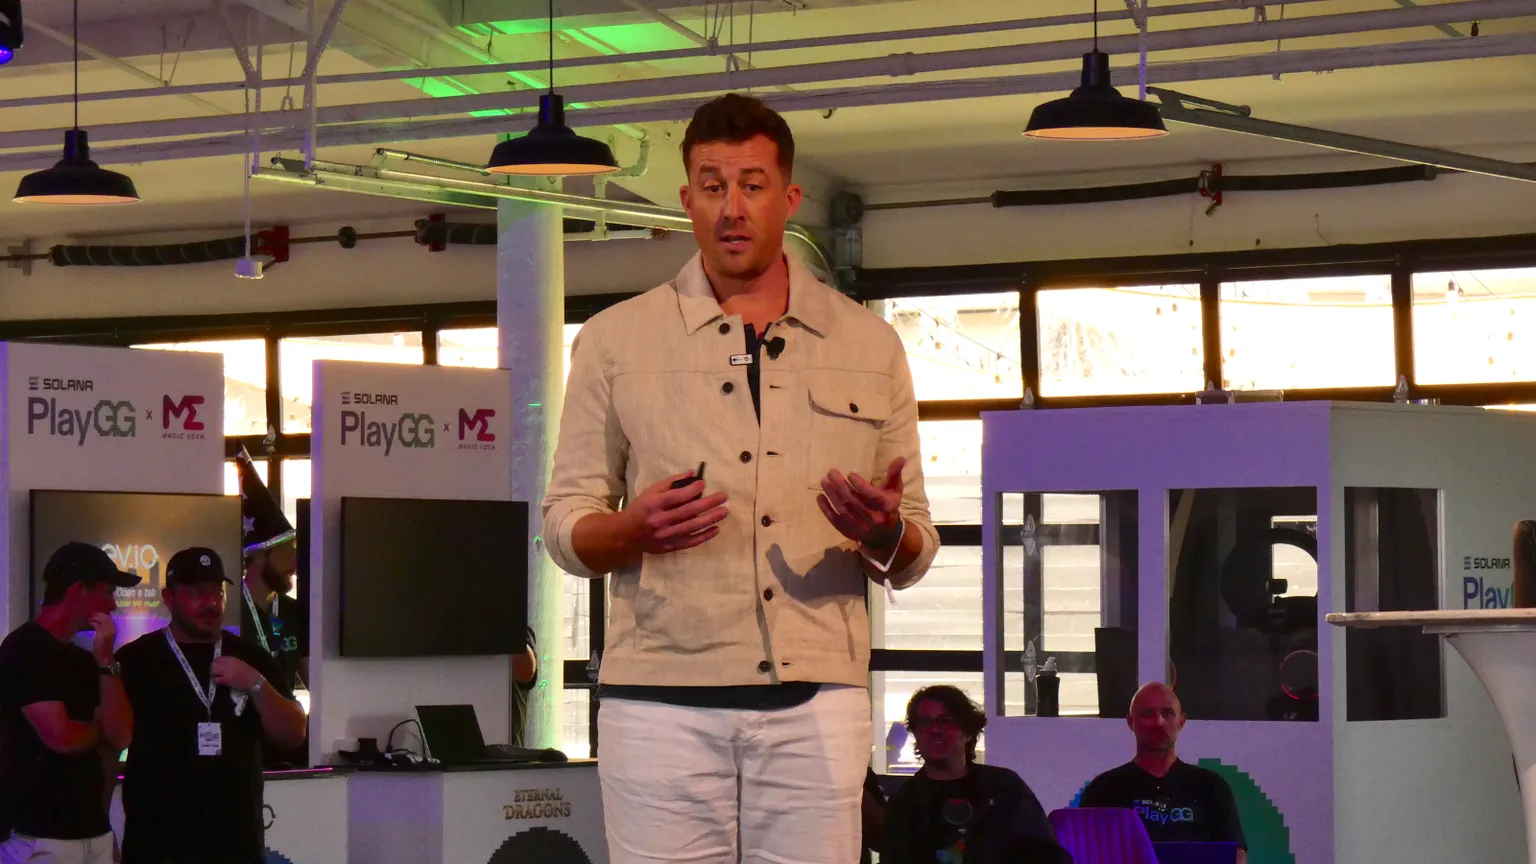 ATMTA co-founder and CEO Michael Wagner at Solana's PlayGG event. Image: Decrypt